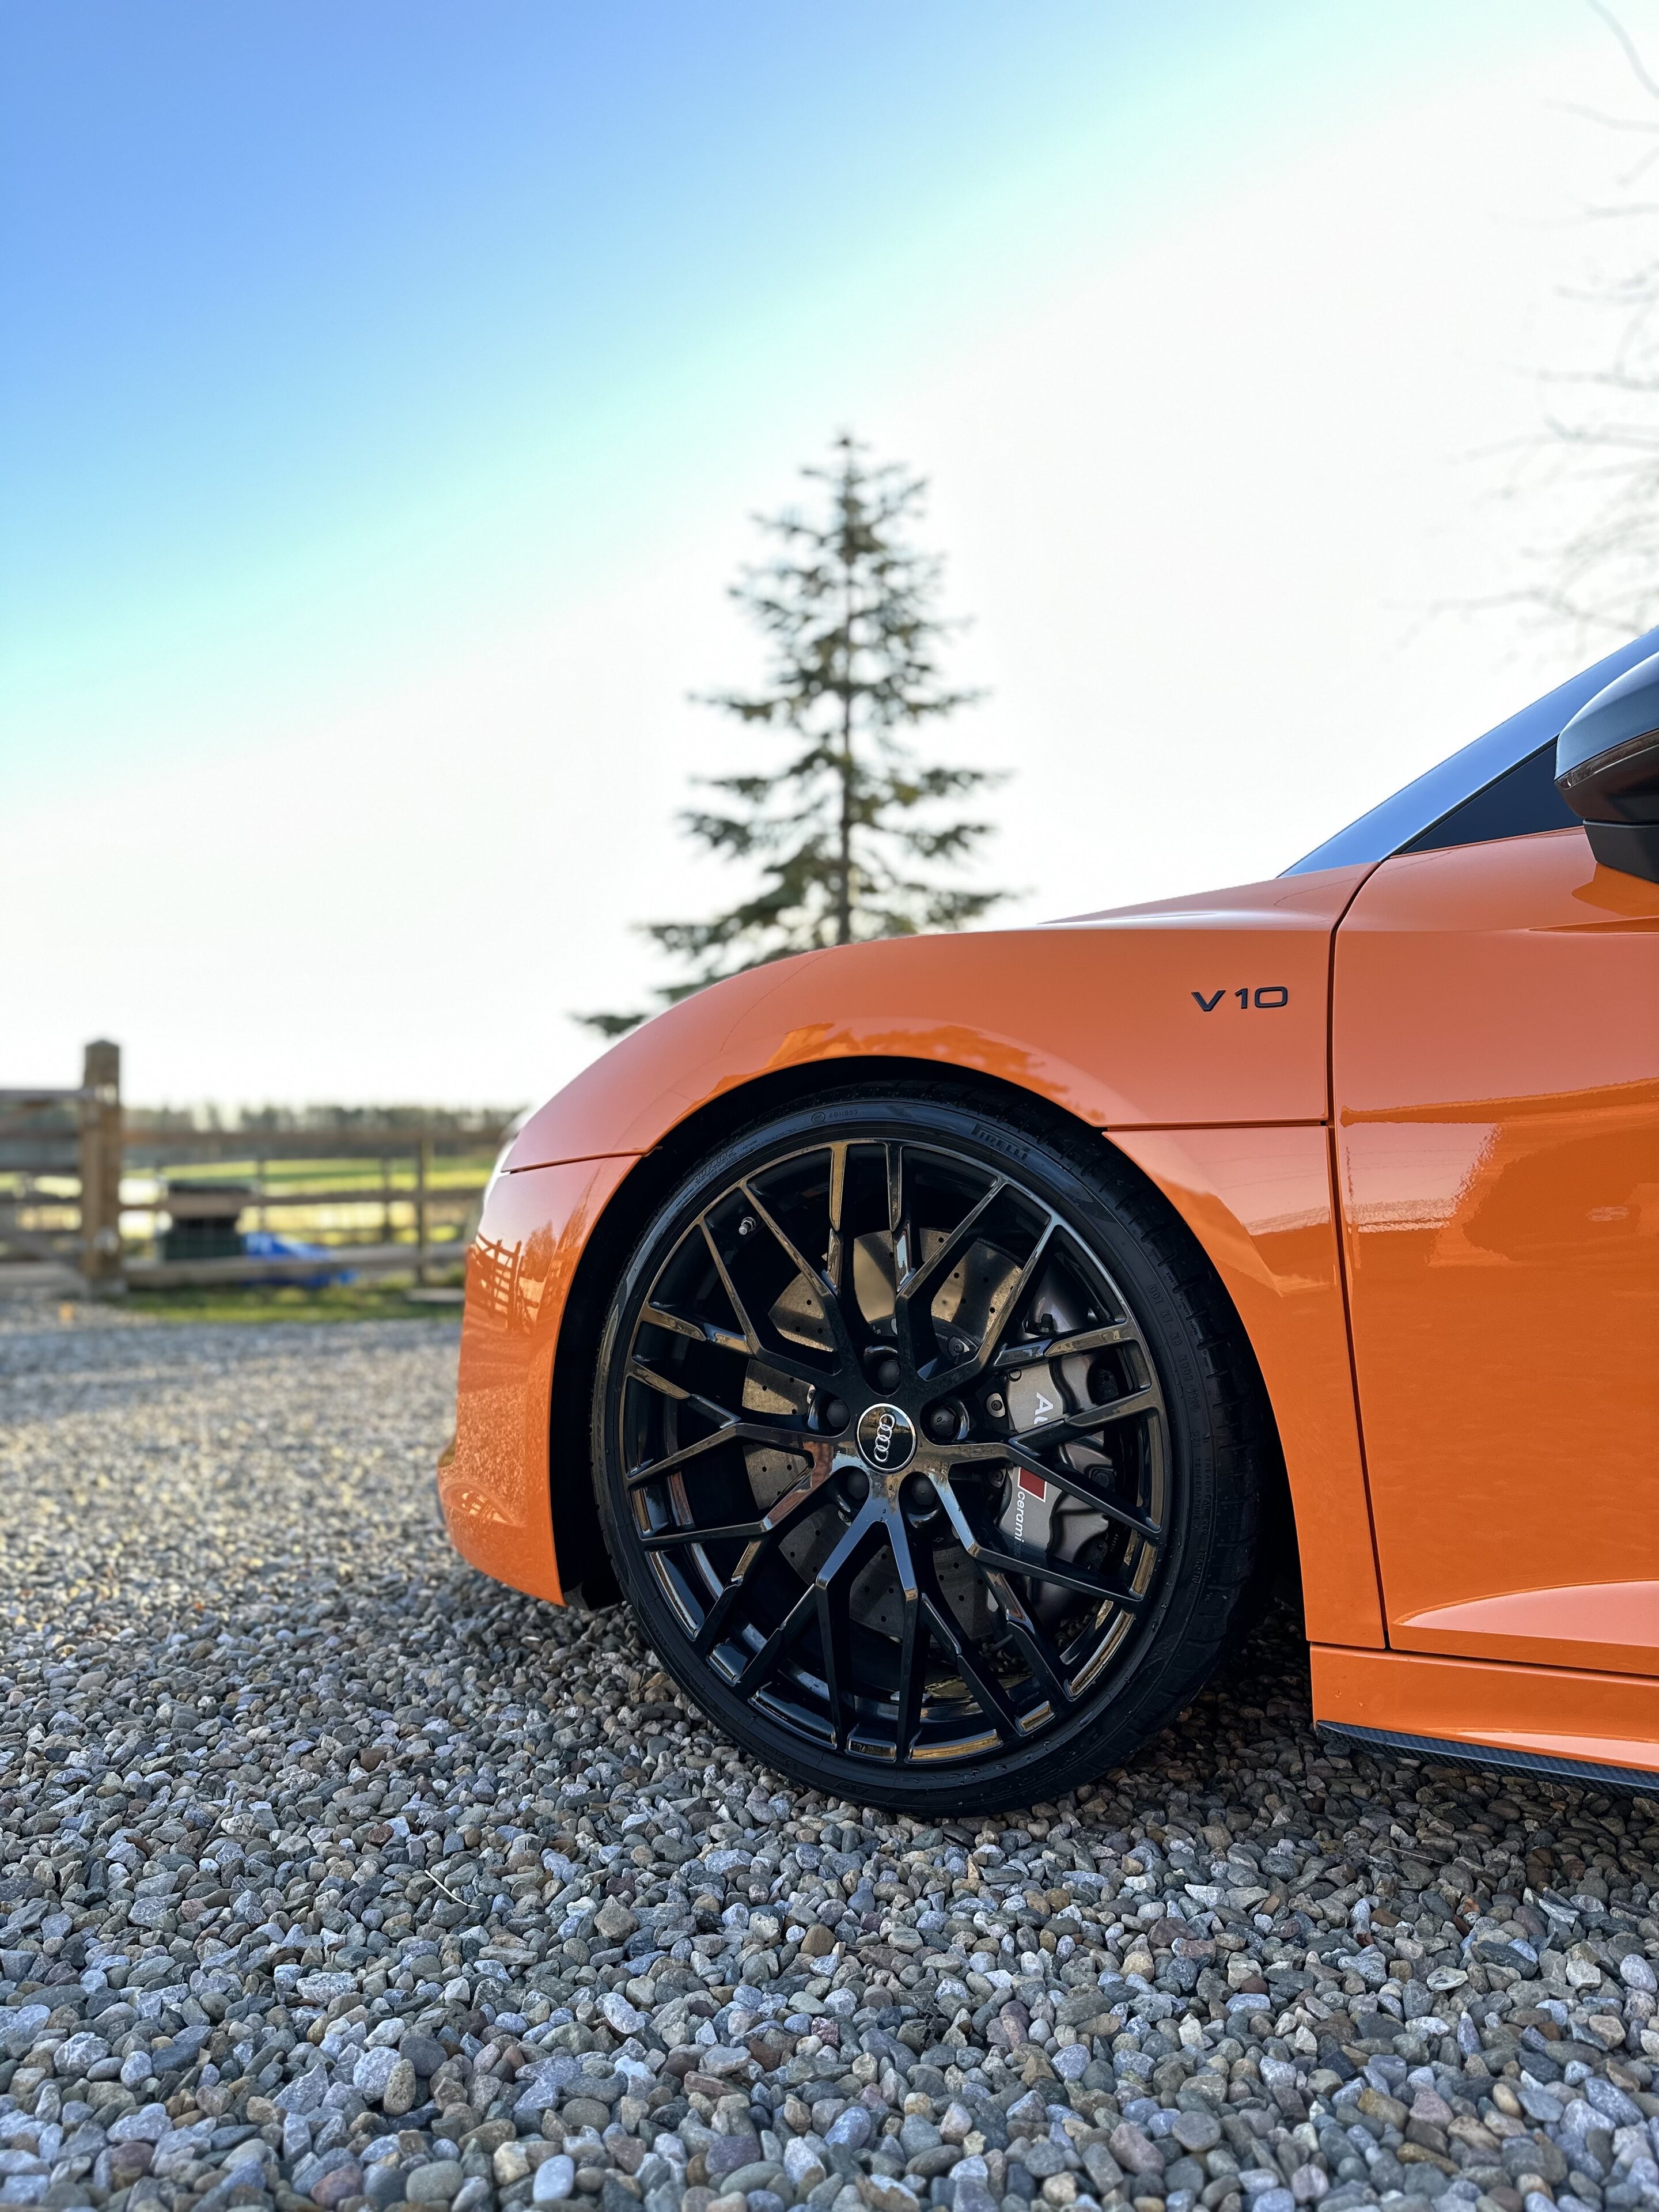 Orange Audi R8 V10 Plus Spyder  - Page 1 - Readers' Cars - PistonHeads UK - This image features a vibrant orange sports car parked on a gravel surface. The car has a sleek design with black rims and is positioned at an angle to the viewer. In the background, there is a clear blue sky and a hint of greenery, suggesting the car is outside in a rural or suburban setting. On the left side of the image, partially obscured by the vehicle, is a tree. The overall scene conveys a sense of speed and luxury associated with high-performance sports cars.